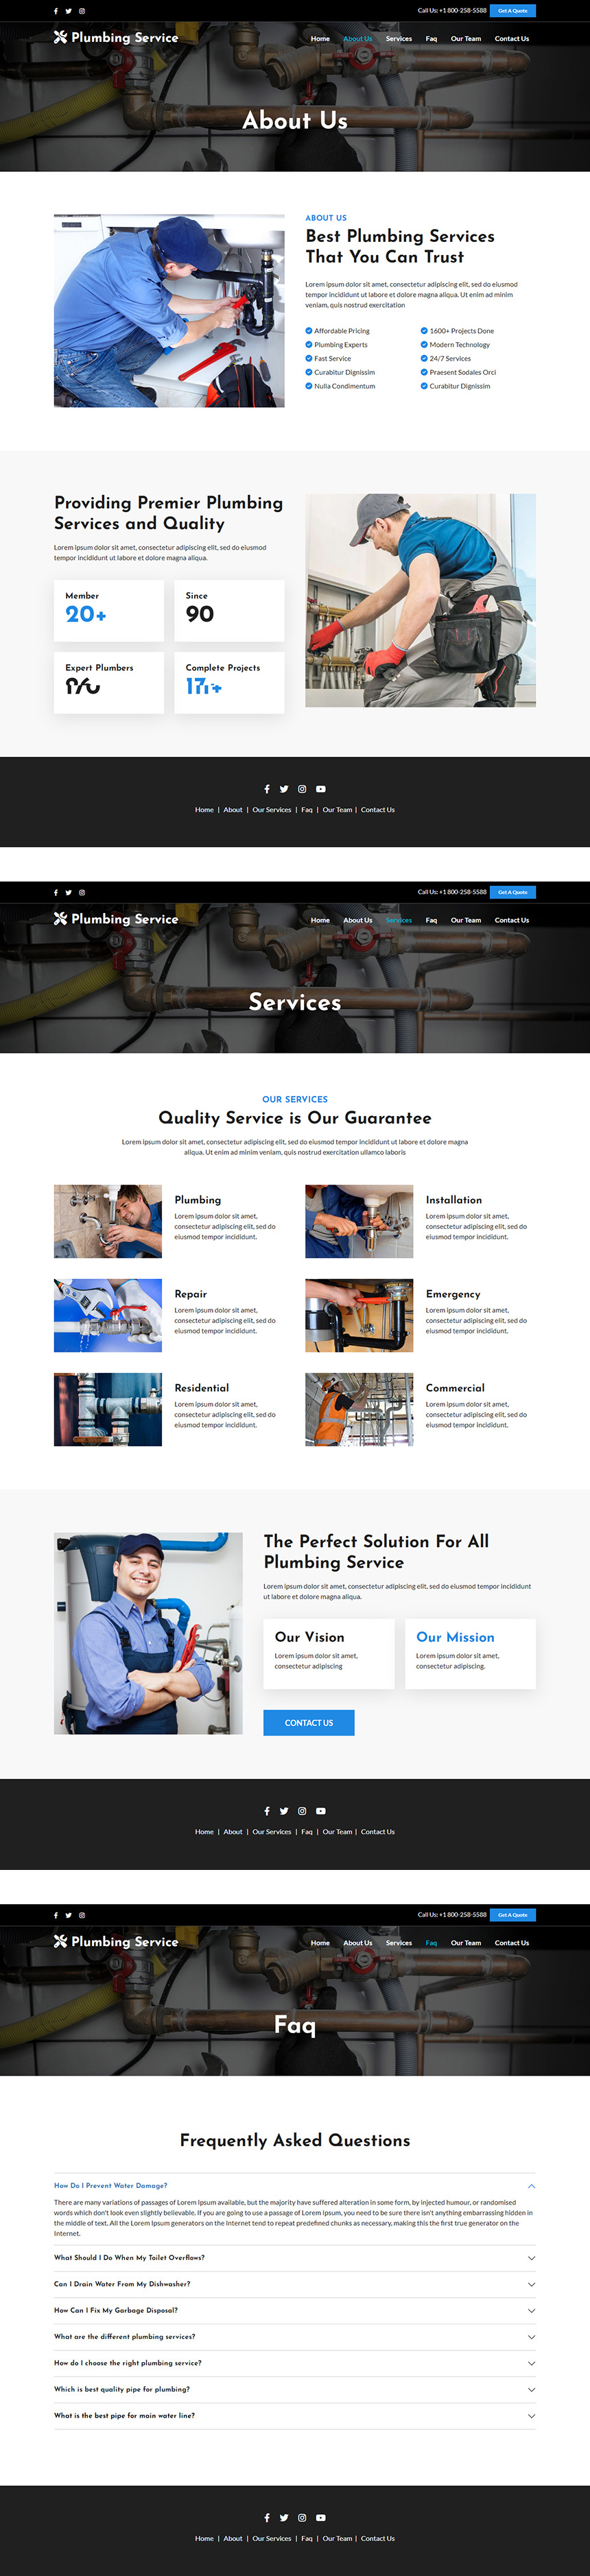 residential and commercial plumbing service responsive website design